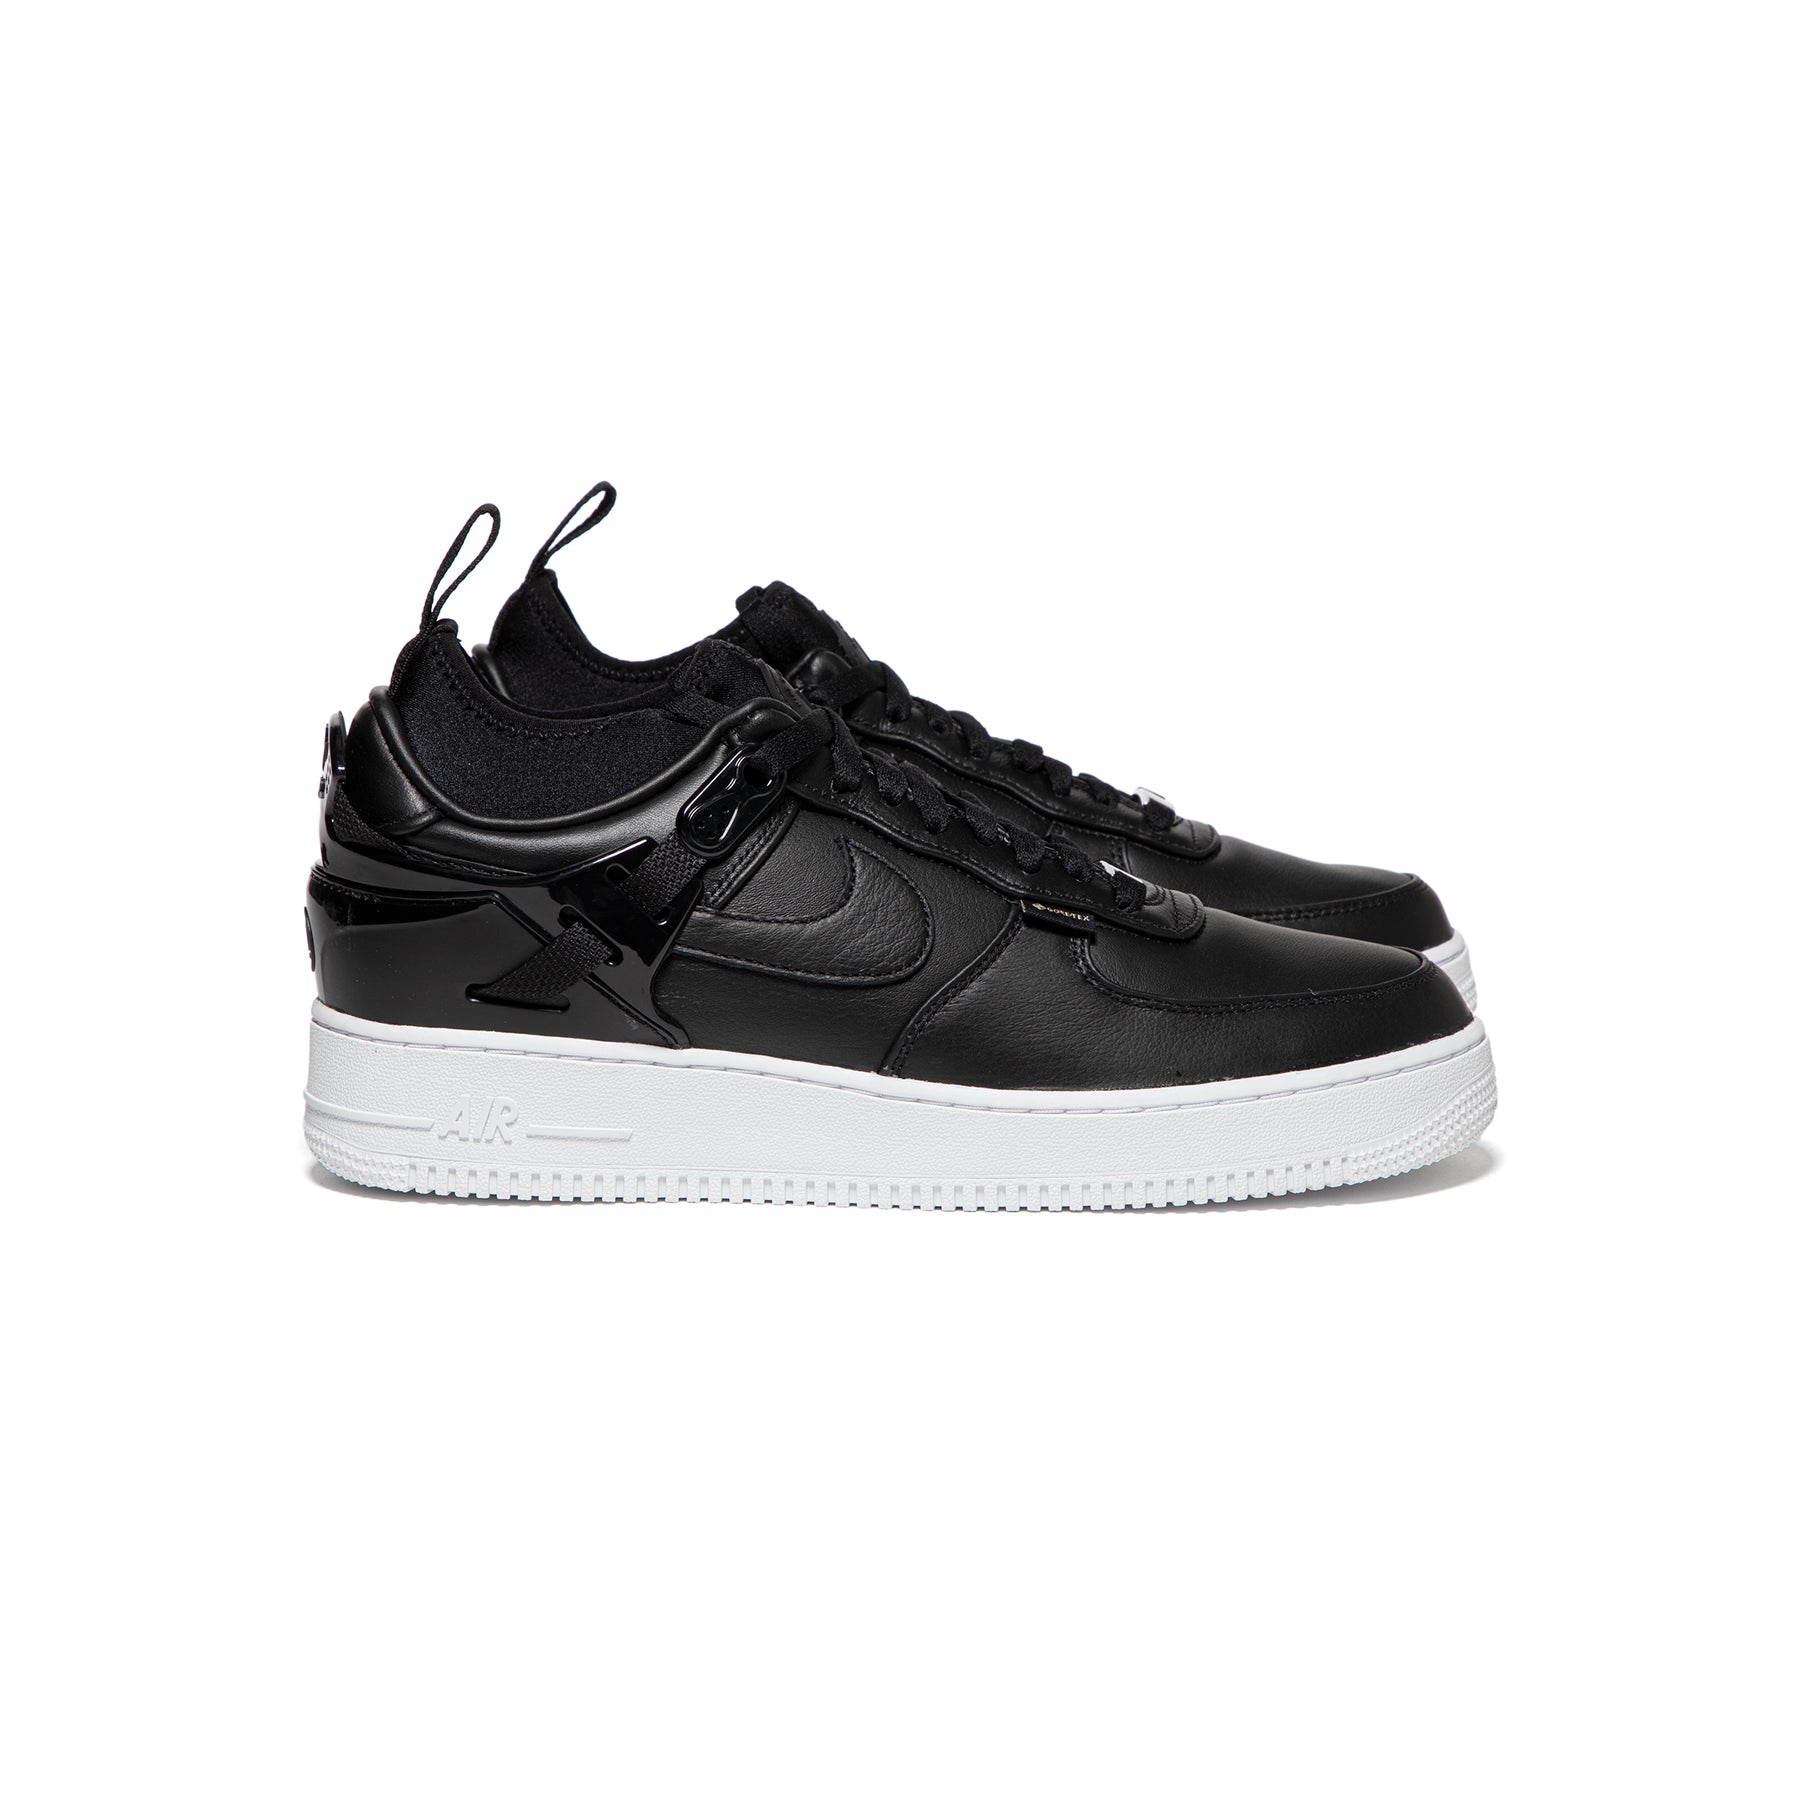 Nike x UNDERCOVER Air Force 1 Low SP (Black/White) – Concepts